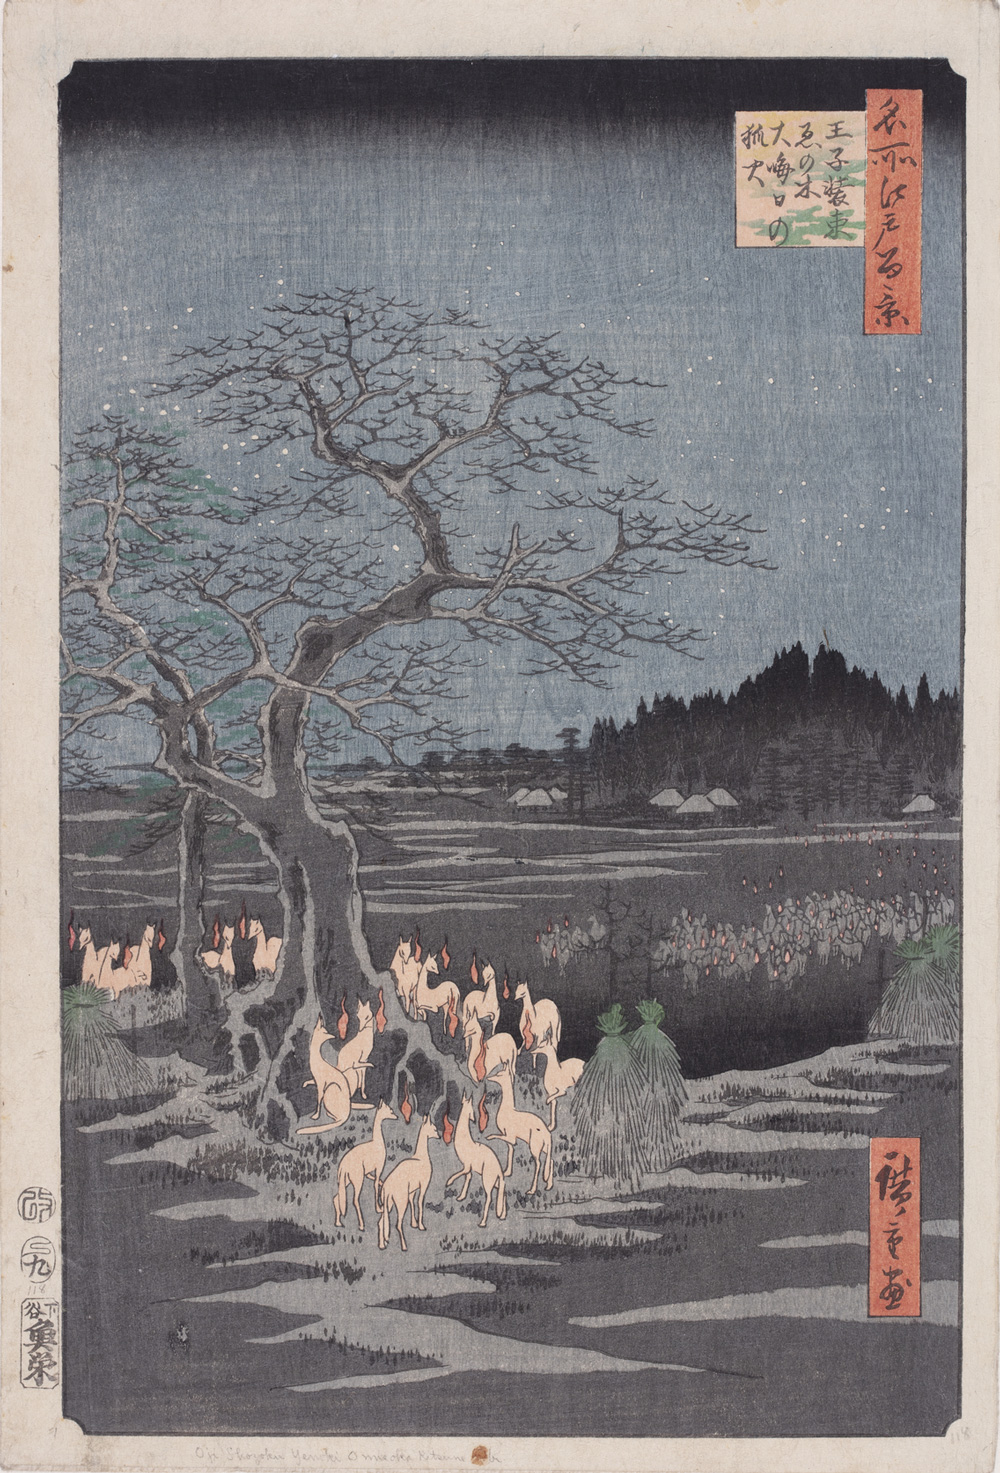 Japanese print of a night time scene on New Years Eve with stars in the sky, marsh and distant buildings in the background and a large group of foxes glow (foxfires) under a tree.